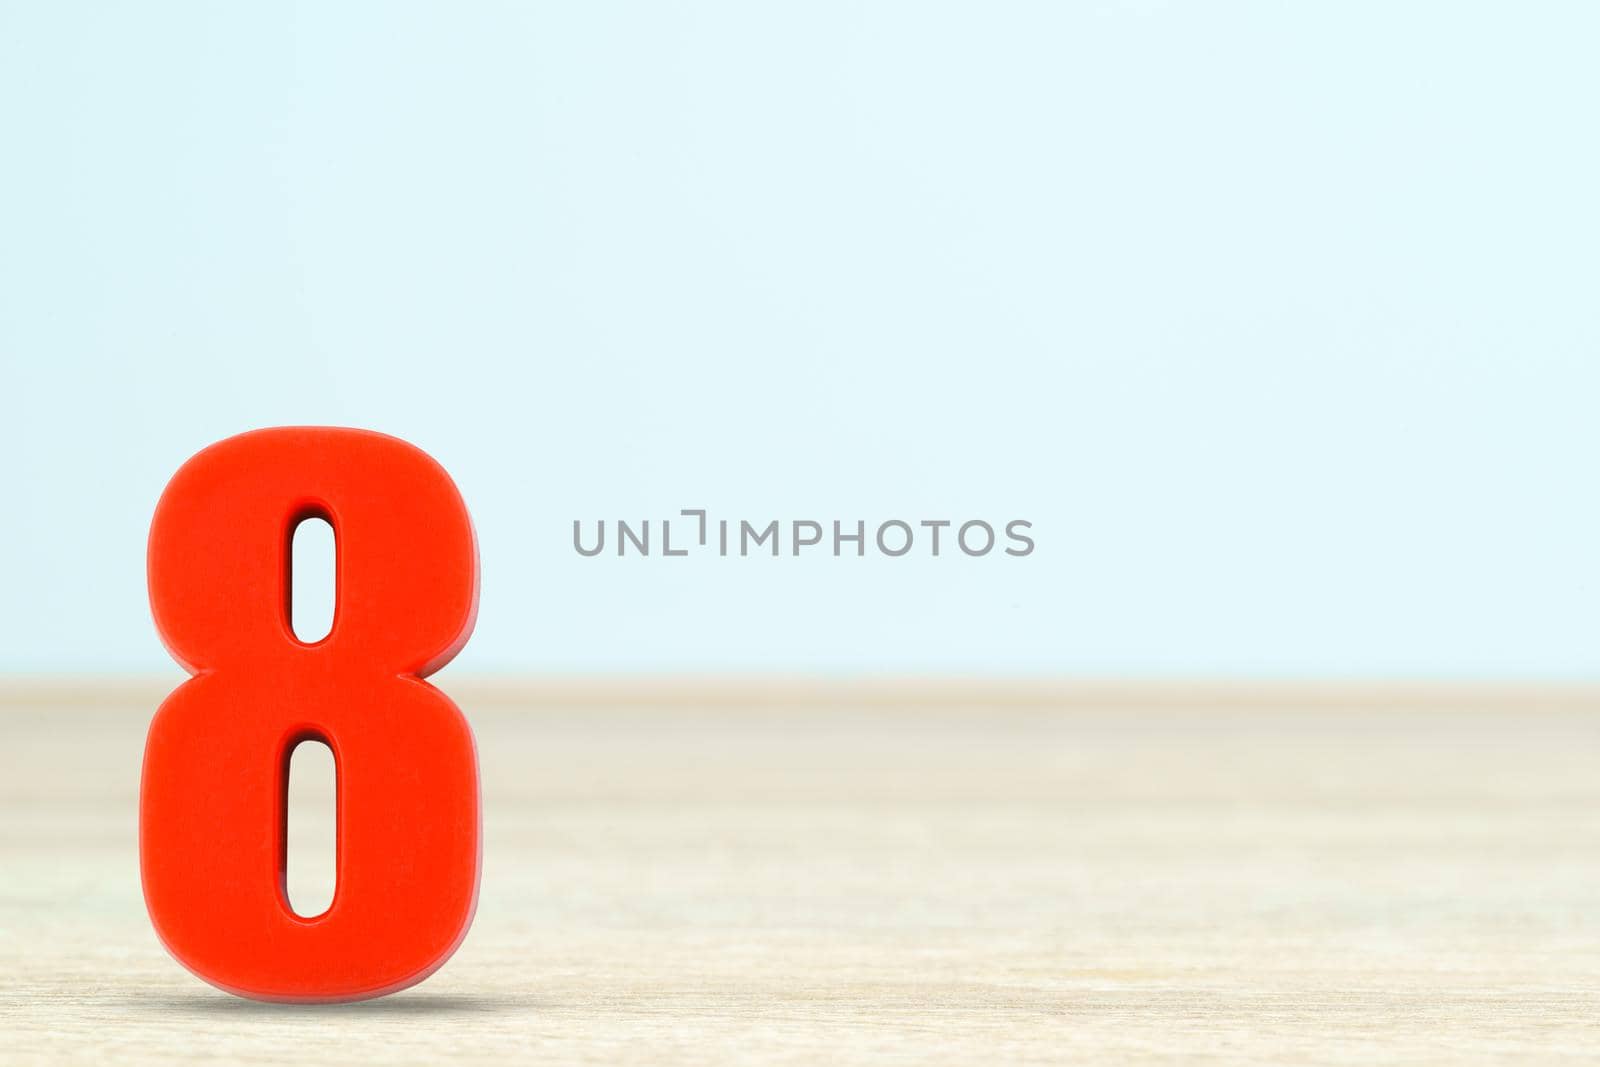 Shot of a number eight made of red plastic on table with copy space